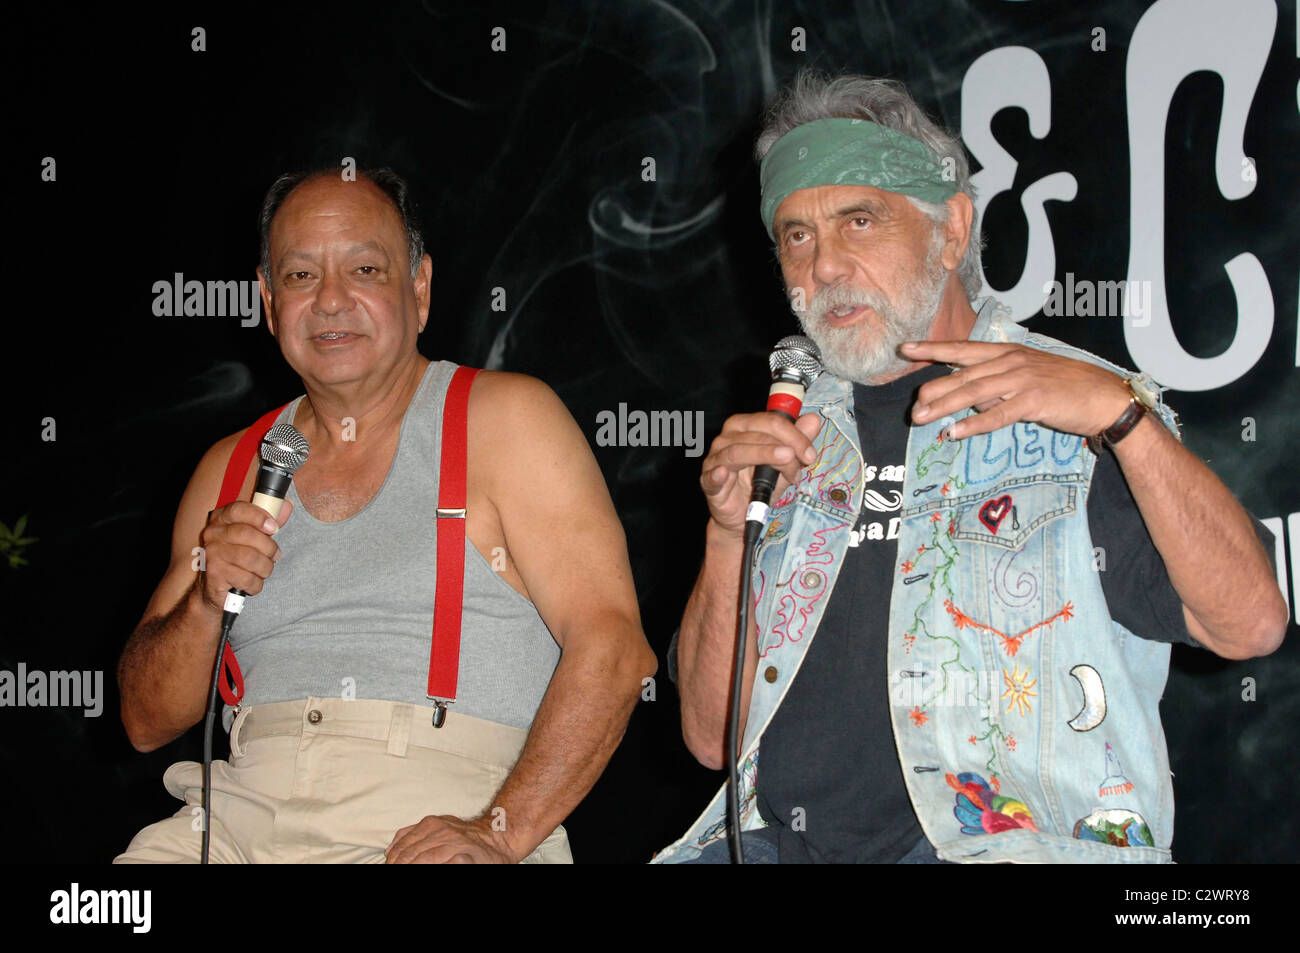 Cheech Marin And Tommy Chong Cheech Chong Announce Light Up America Their First Comedy Tour In More Than 25 Years At Stock Photo Alamy